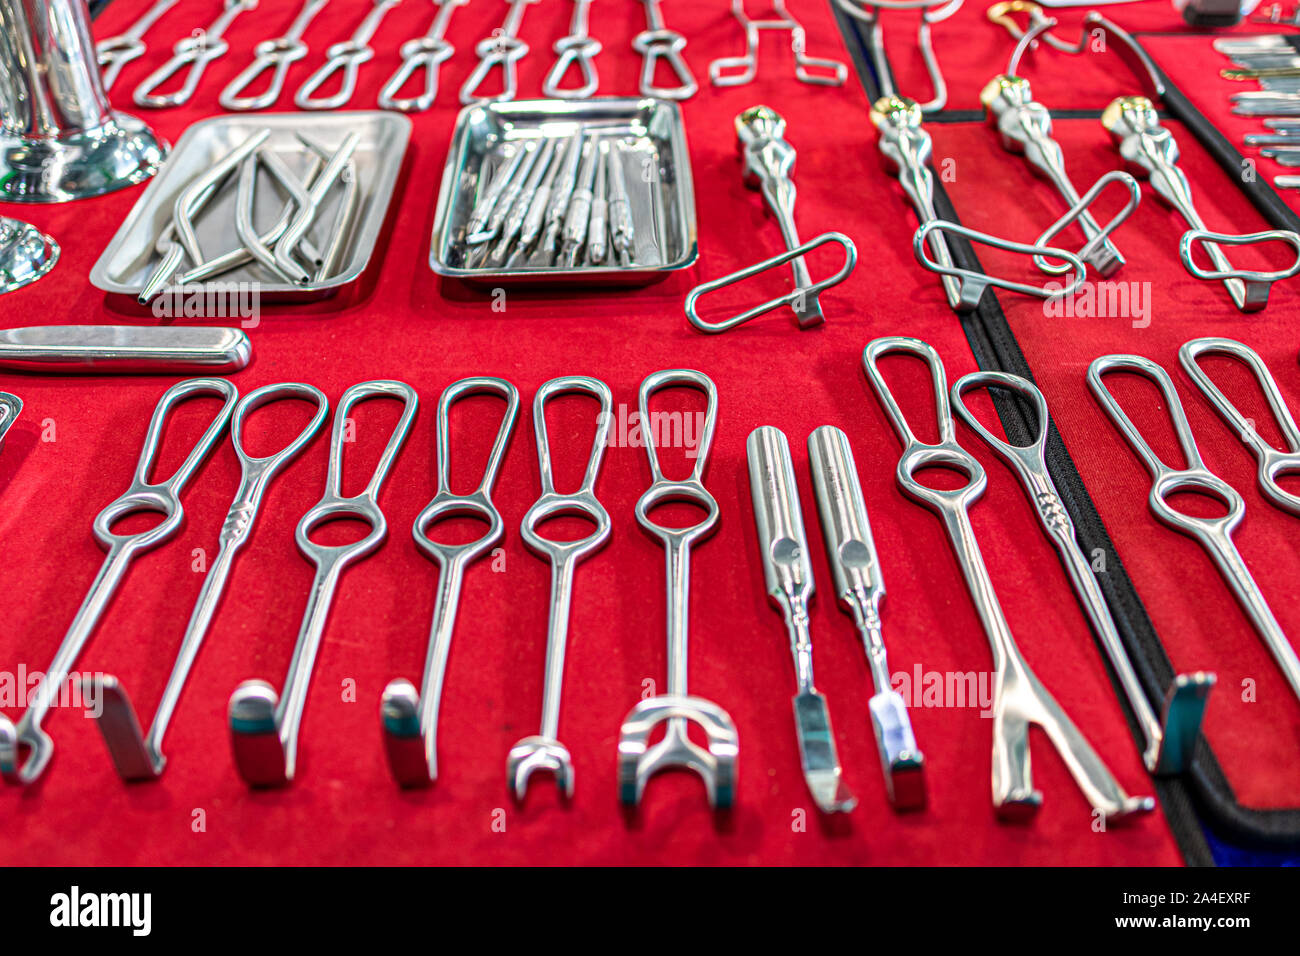 Surgical instruments and tools laid out on a red canvas. Stock Photo